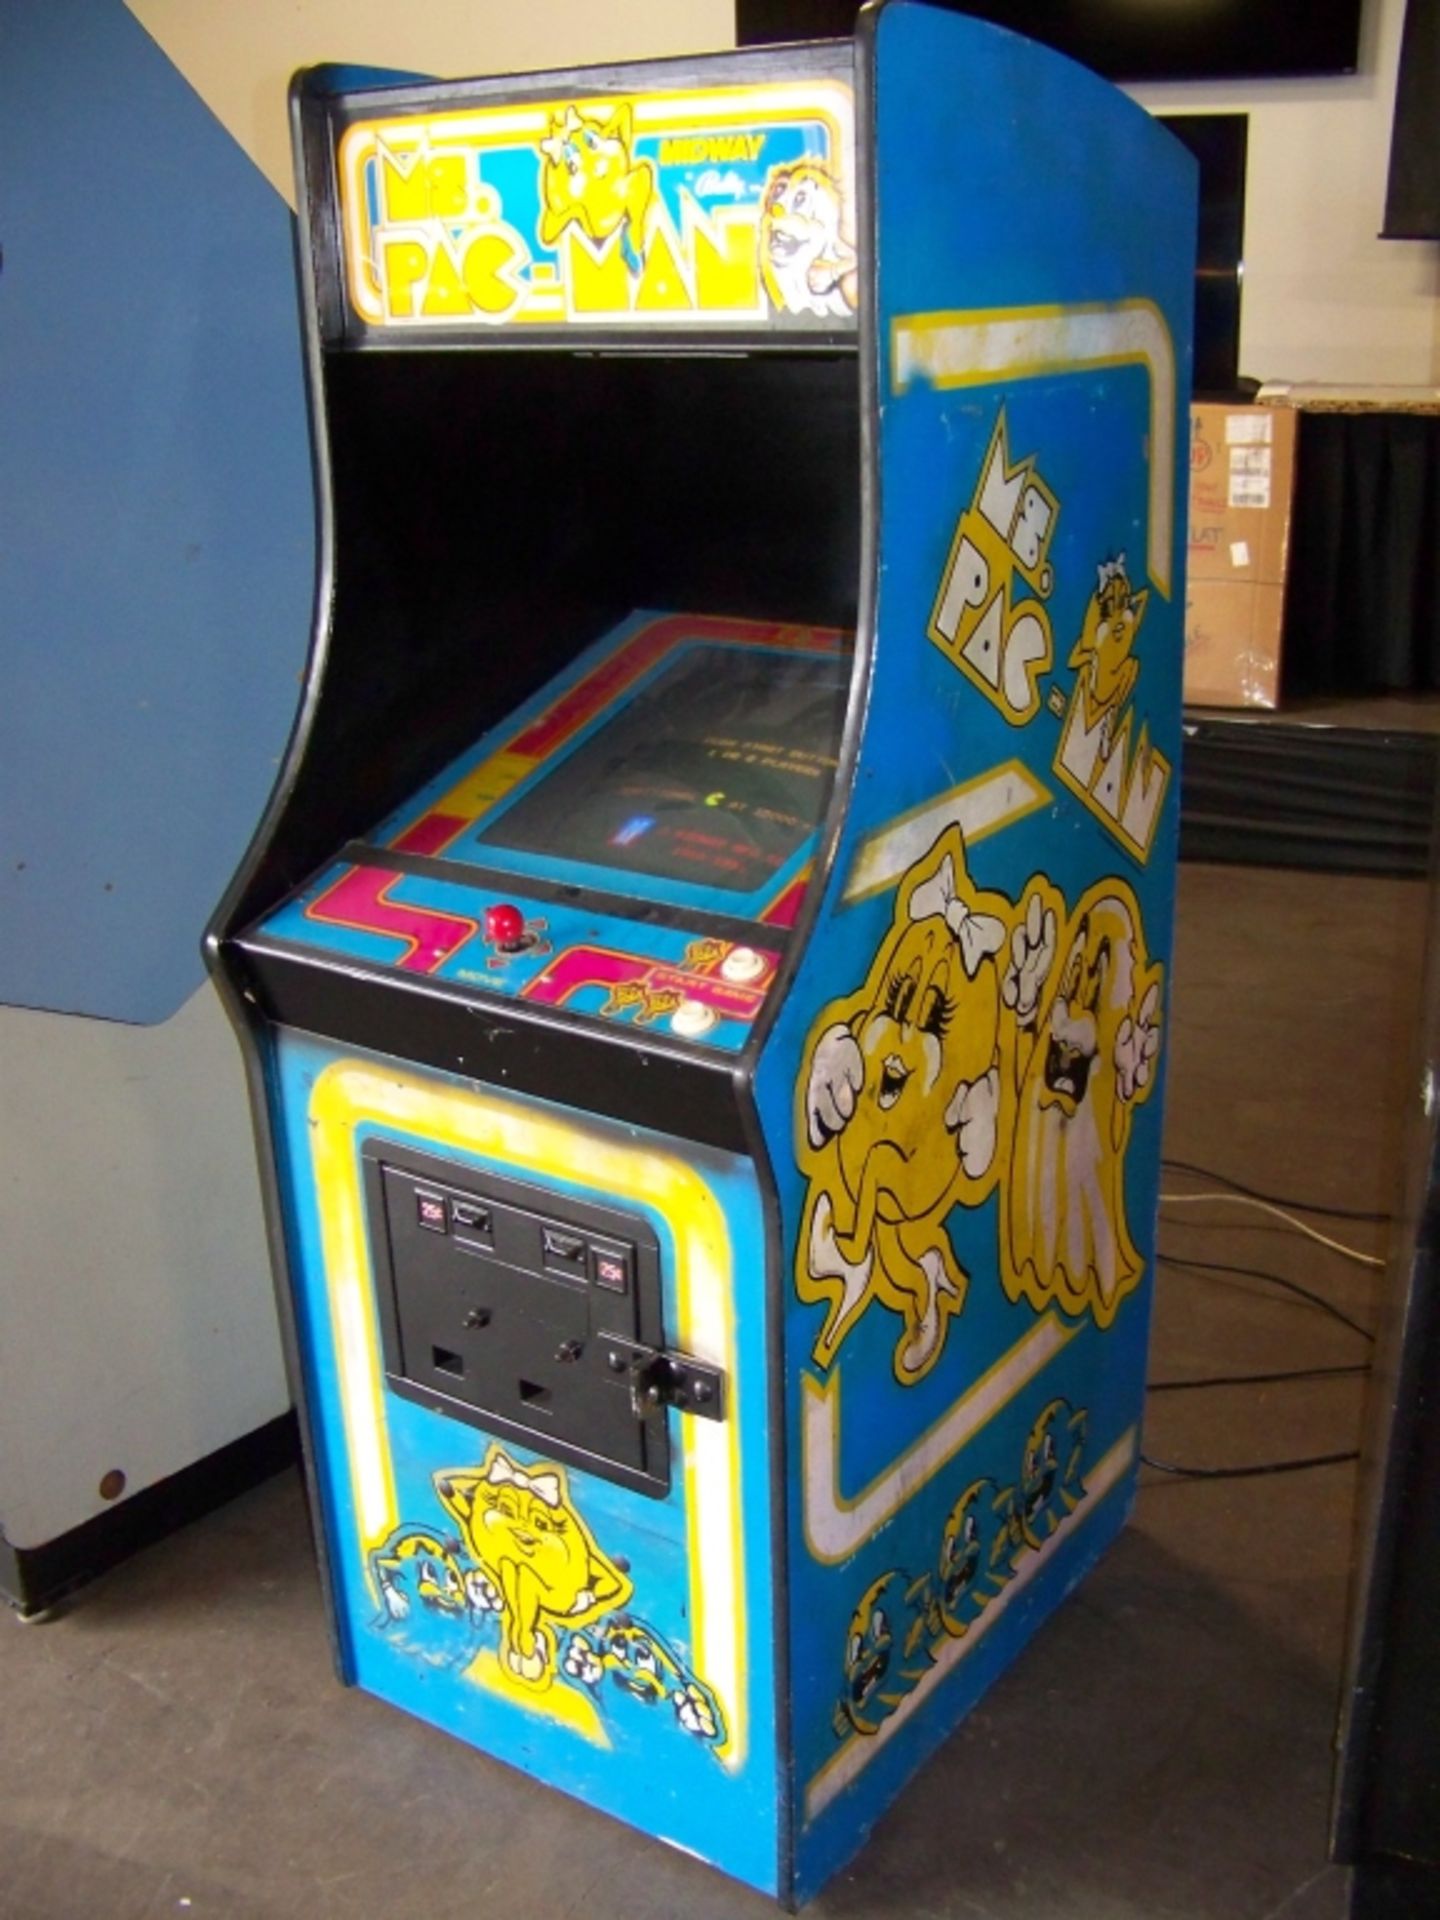 MS PACMAN CLASSIC UPRIGHT ARCADE GAME MIDWAY Item is in used condition. Evidence of wear and - Image 2 of 2